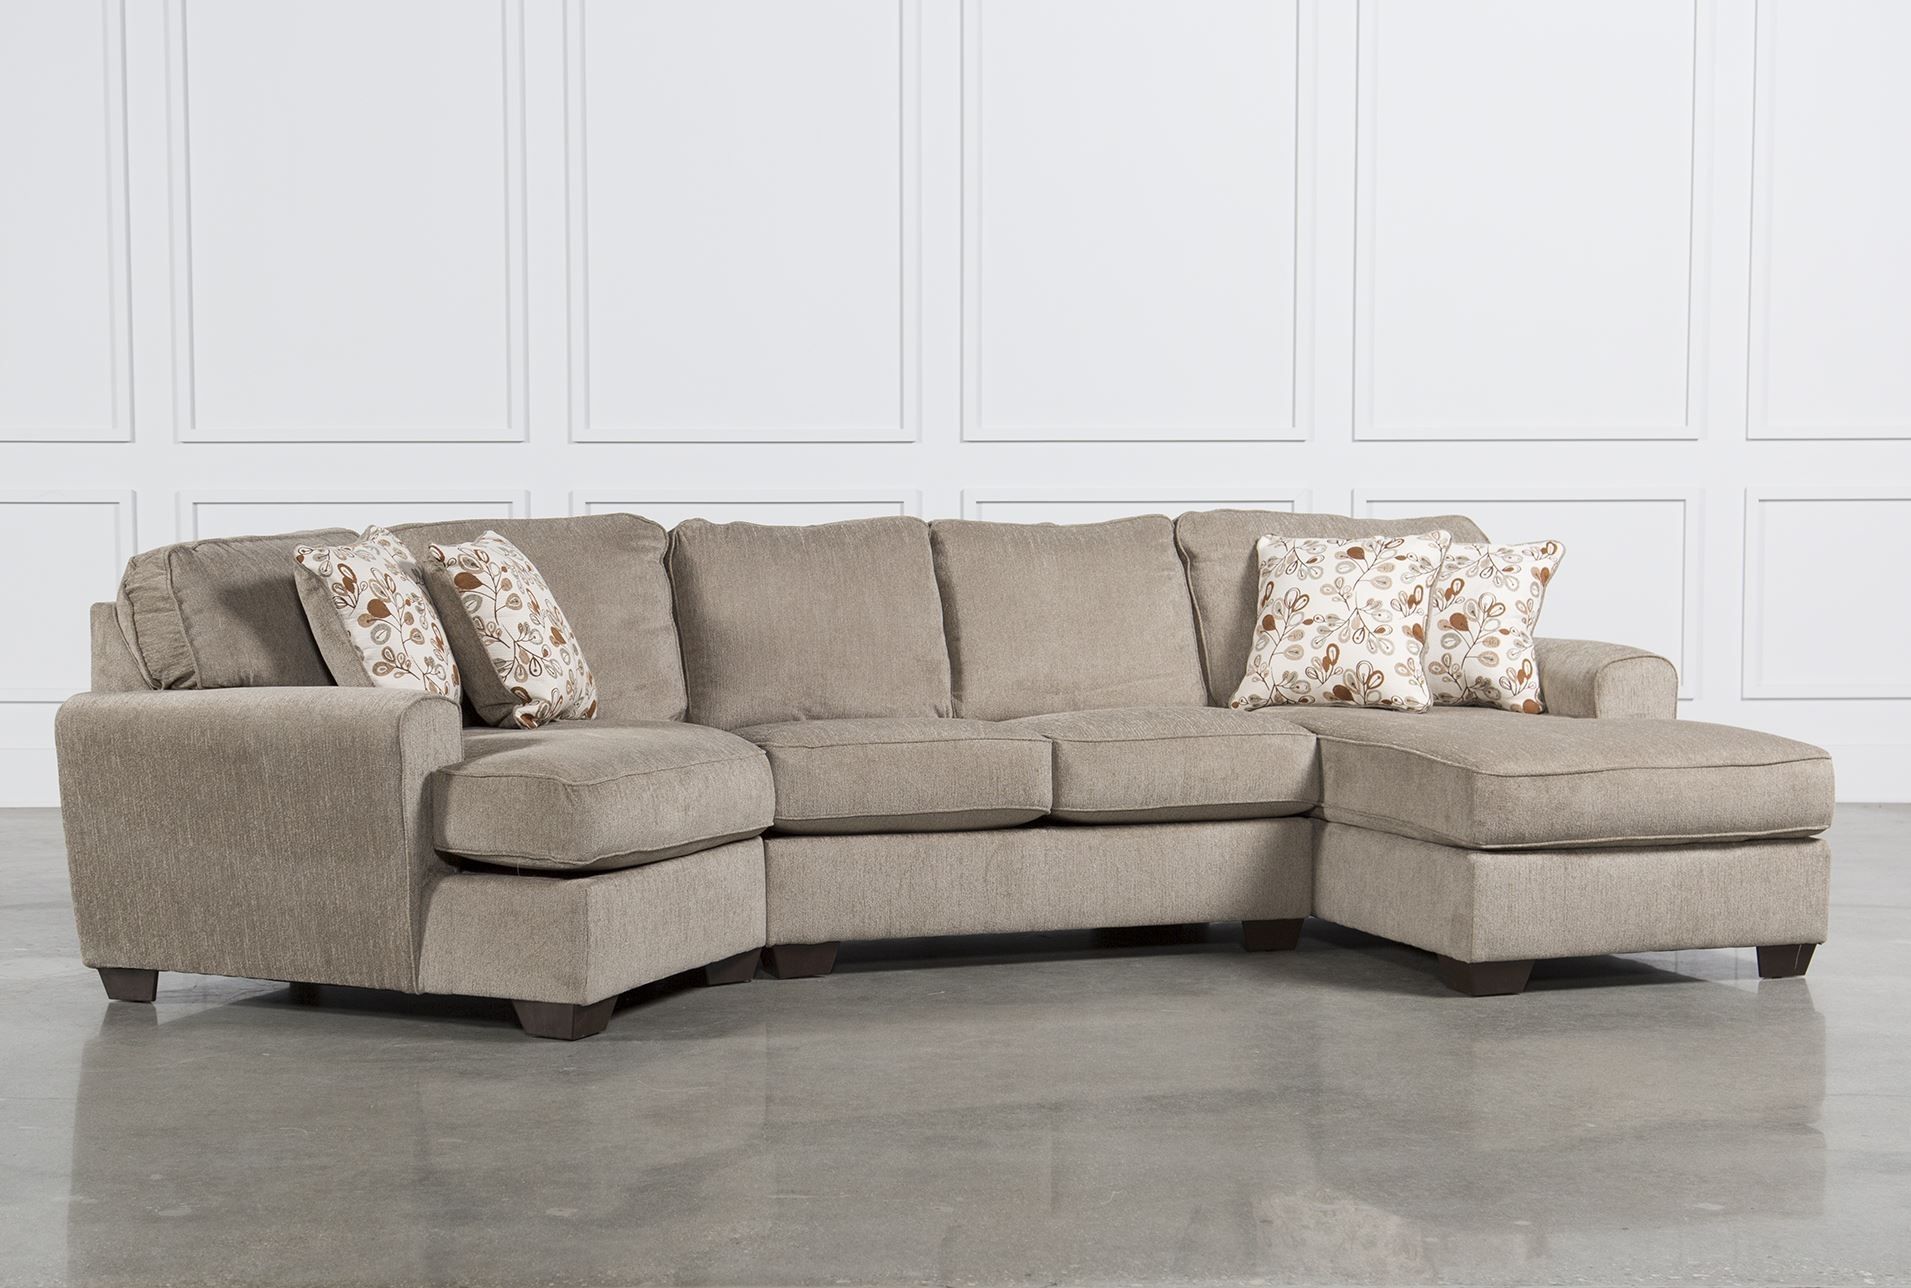 Furniture : Sectional Sofa Gta Sectional Couch El Paso Sectional With El Paso Sectional Sofas (Photo 3 of 10)